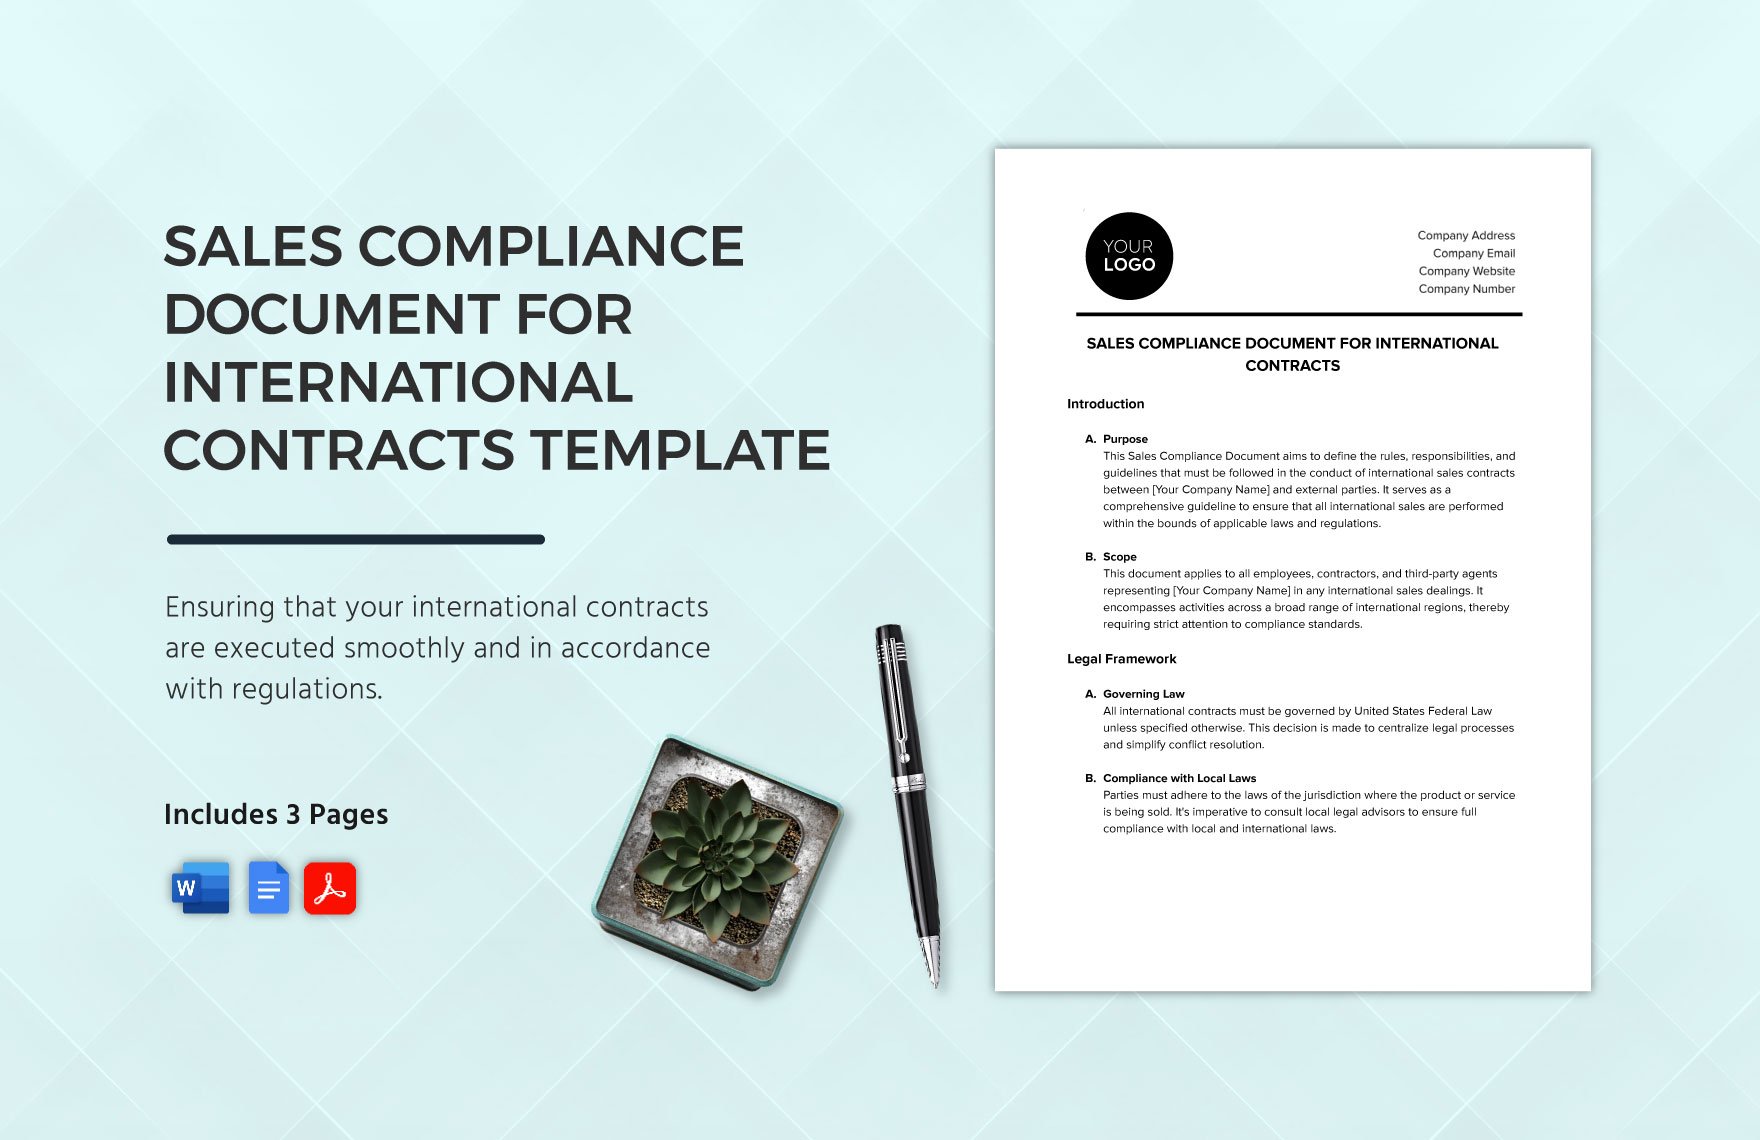 Sales Compliance Document for International Contracts Template